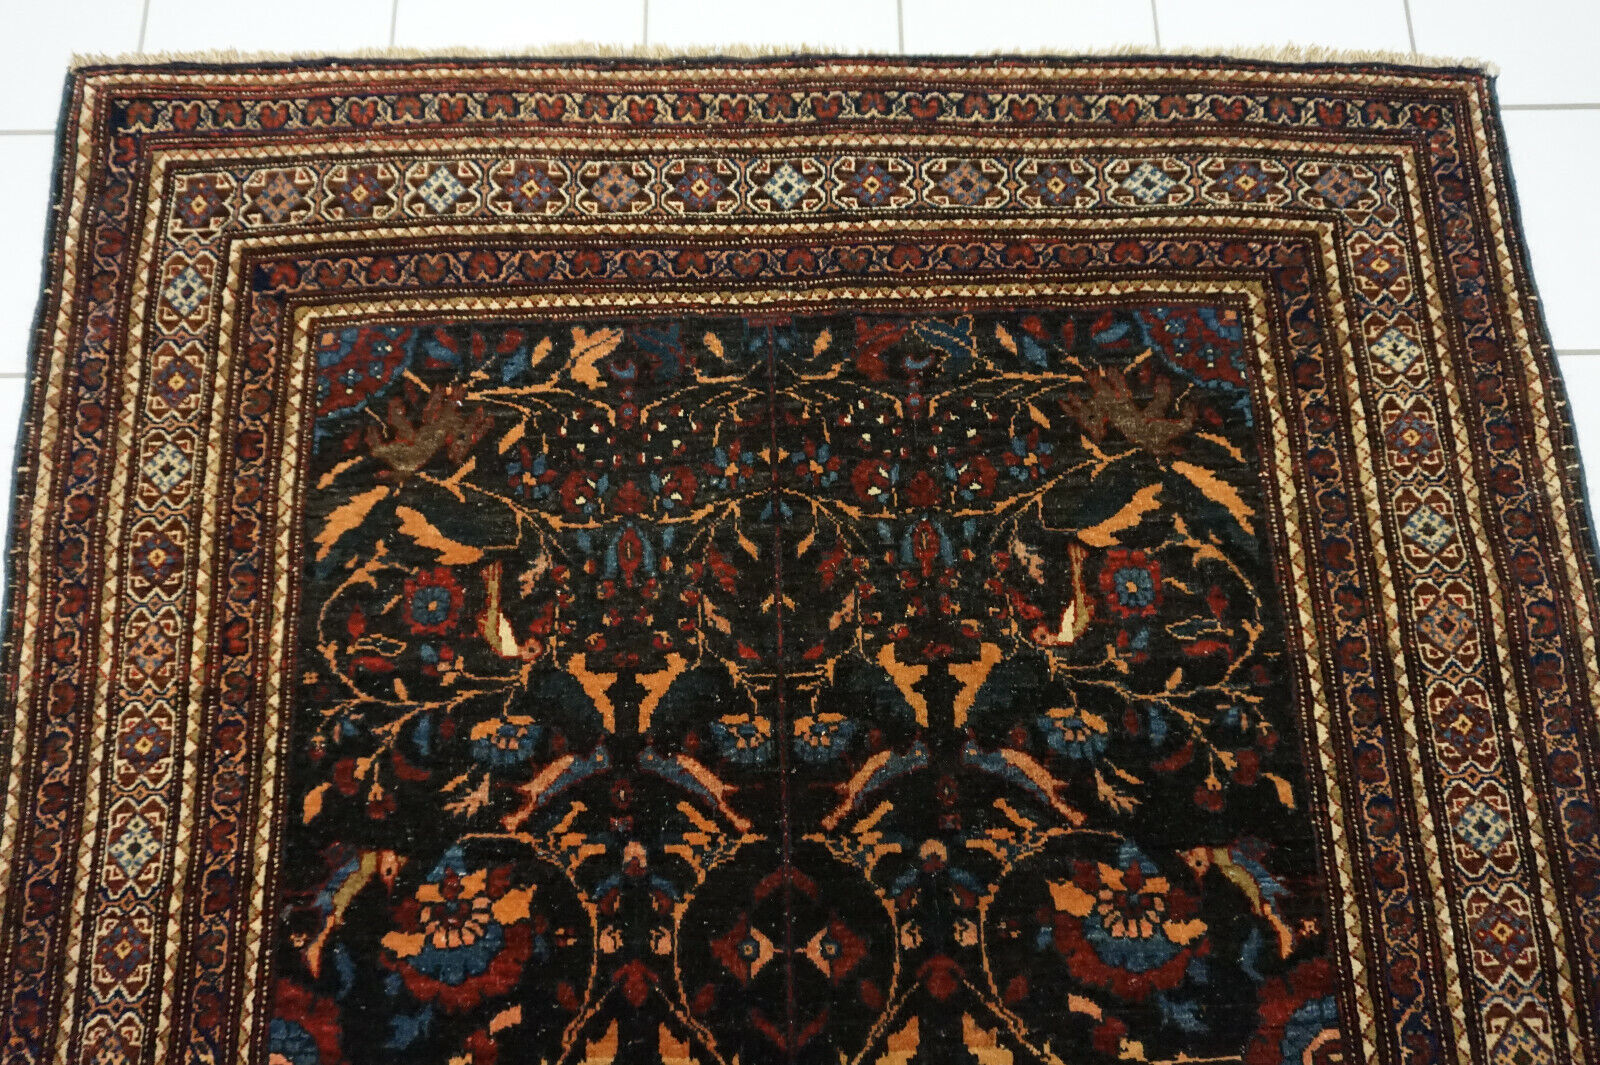 Front view of the Handmade Antique Persian Tehran Rug highlighting its eternal elegance